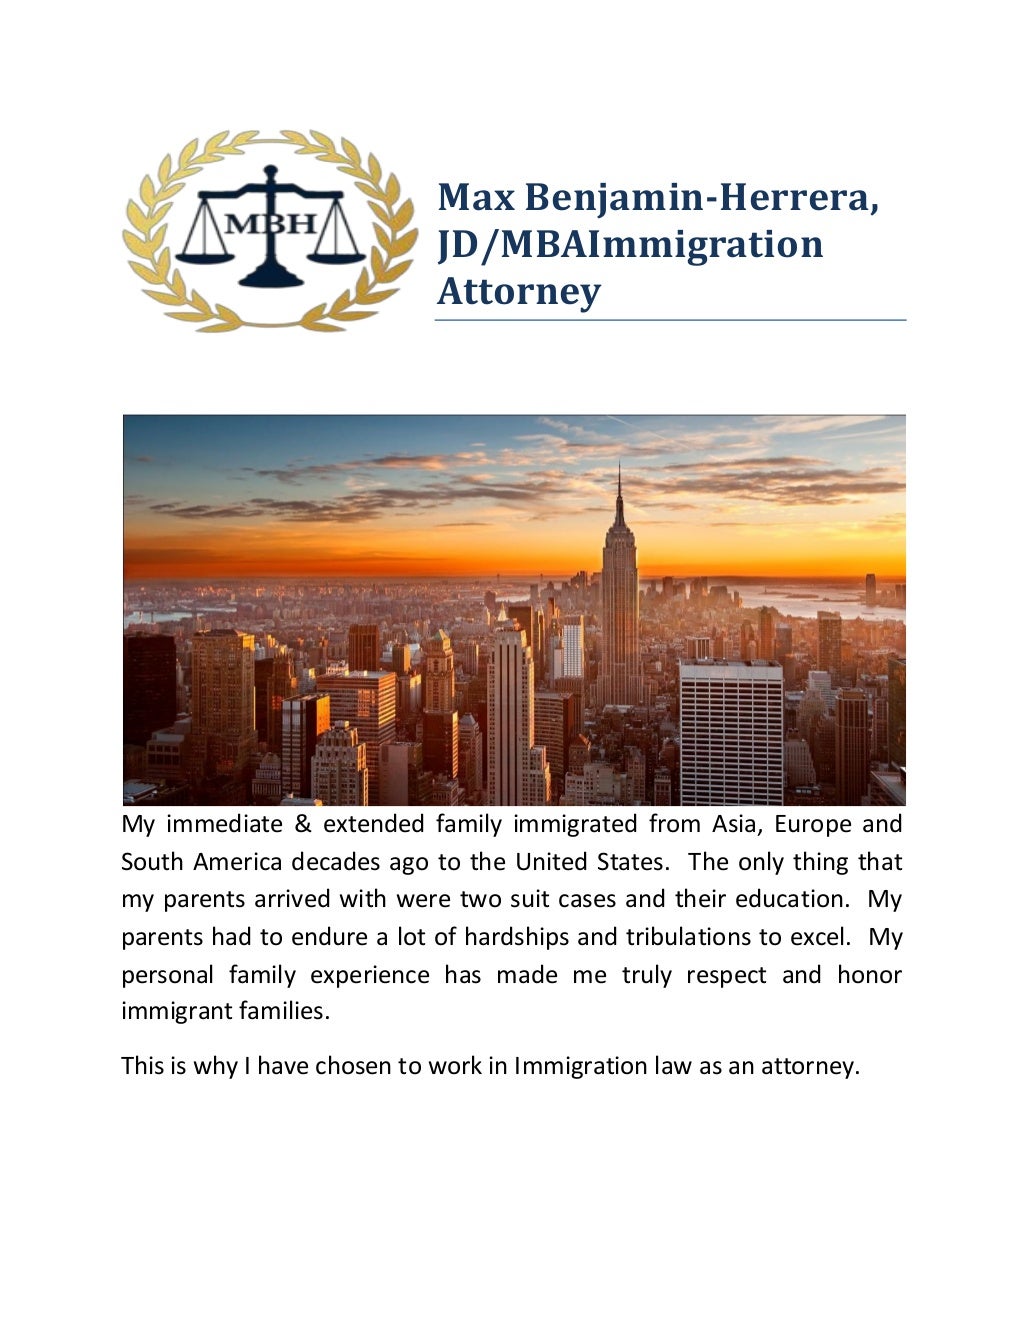 Best immigration attorney in nyc